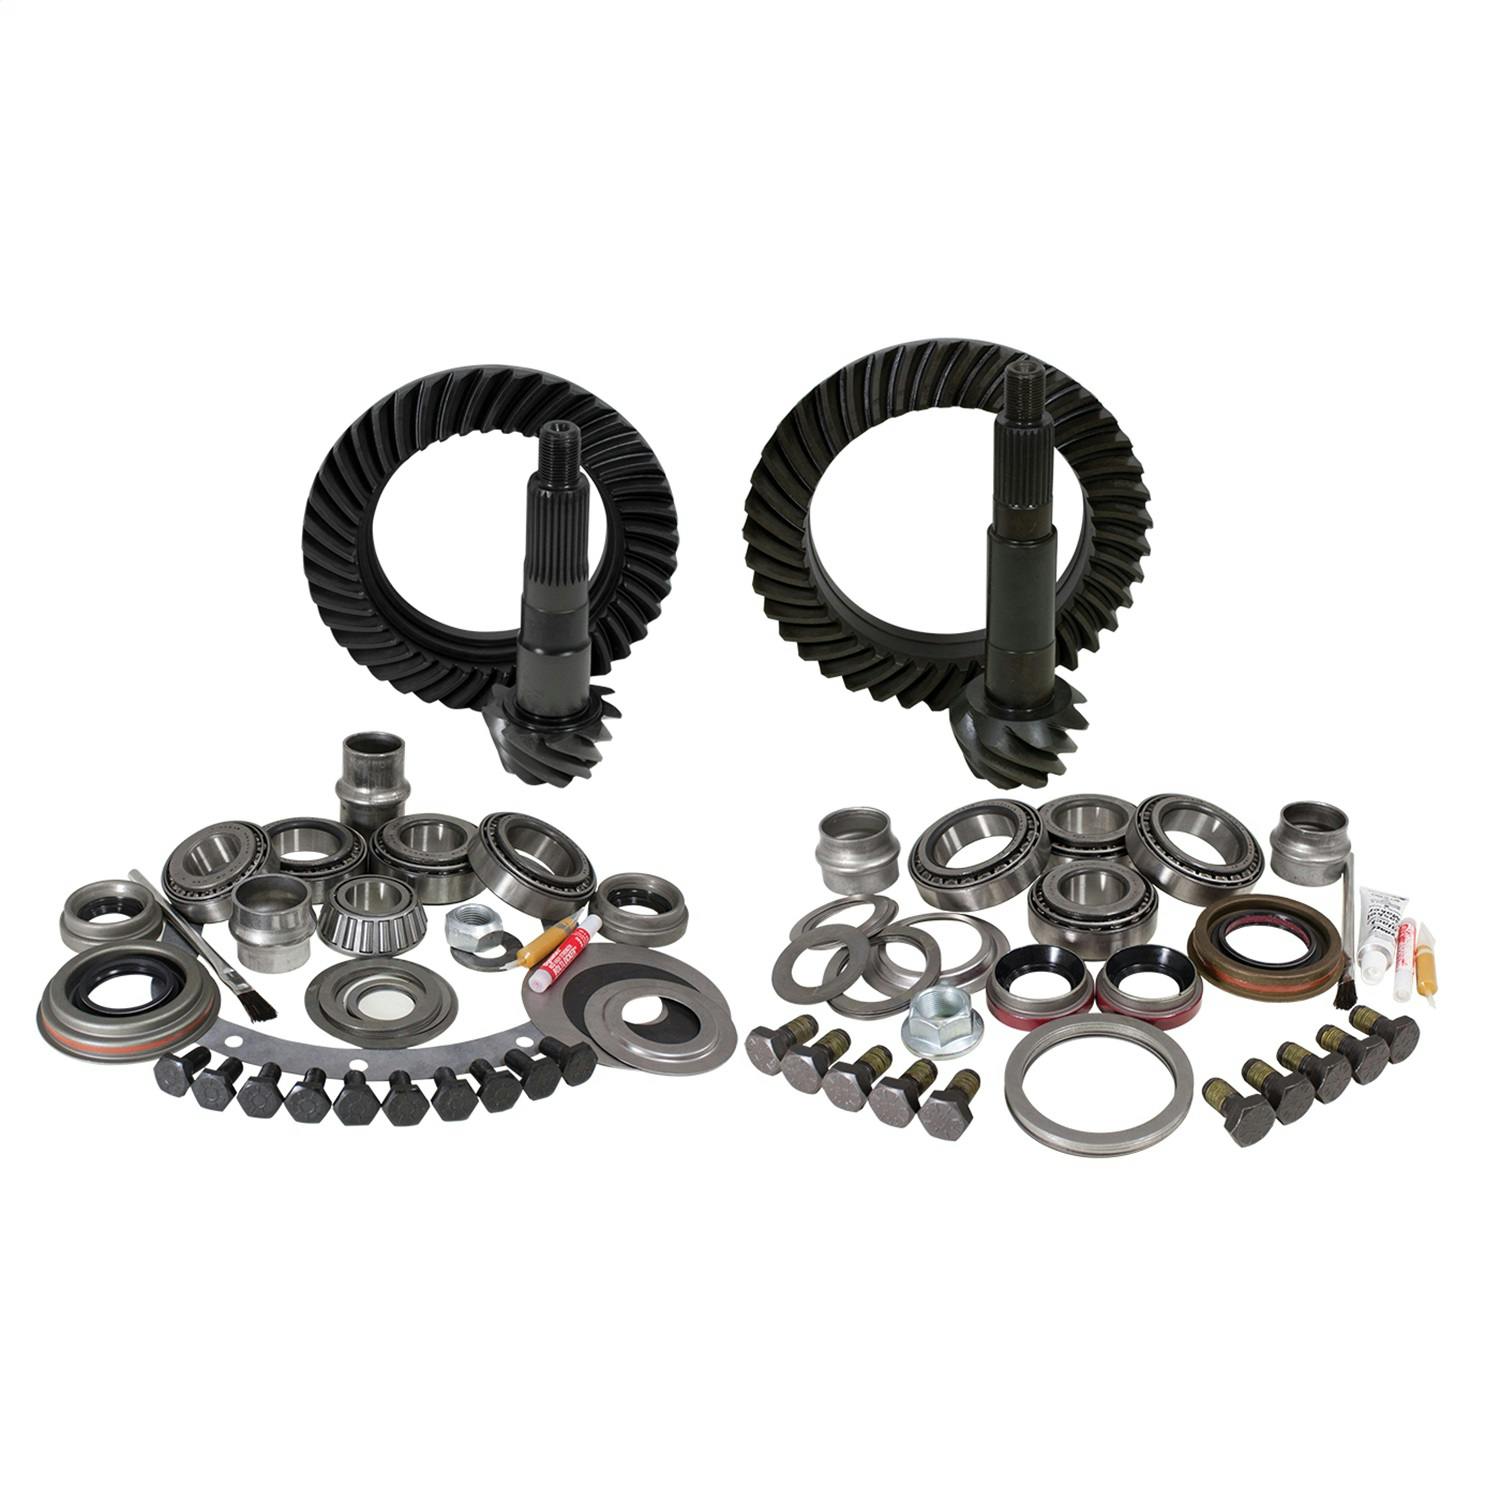 USA Standard Gear ZGK008 Ring And Pinion Set And Complete Install Kit